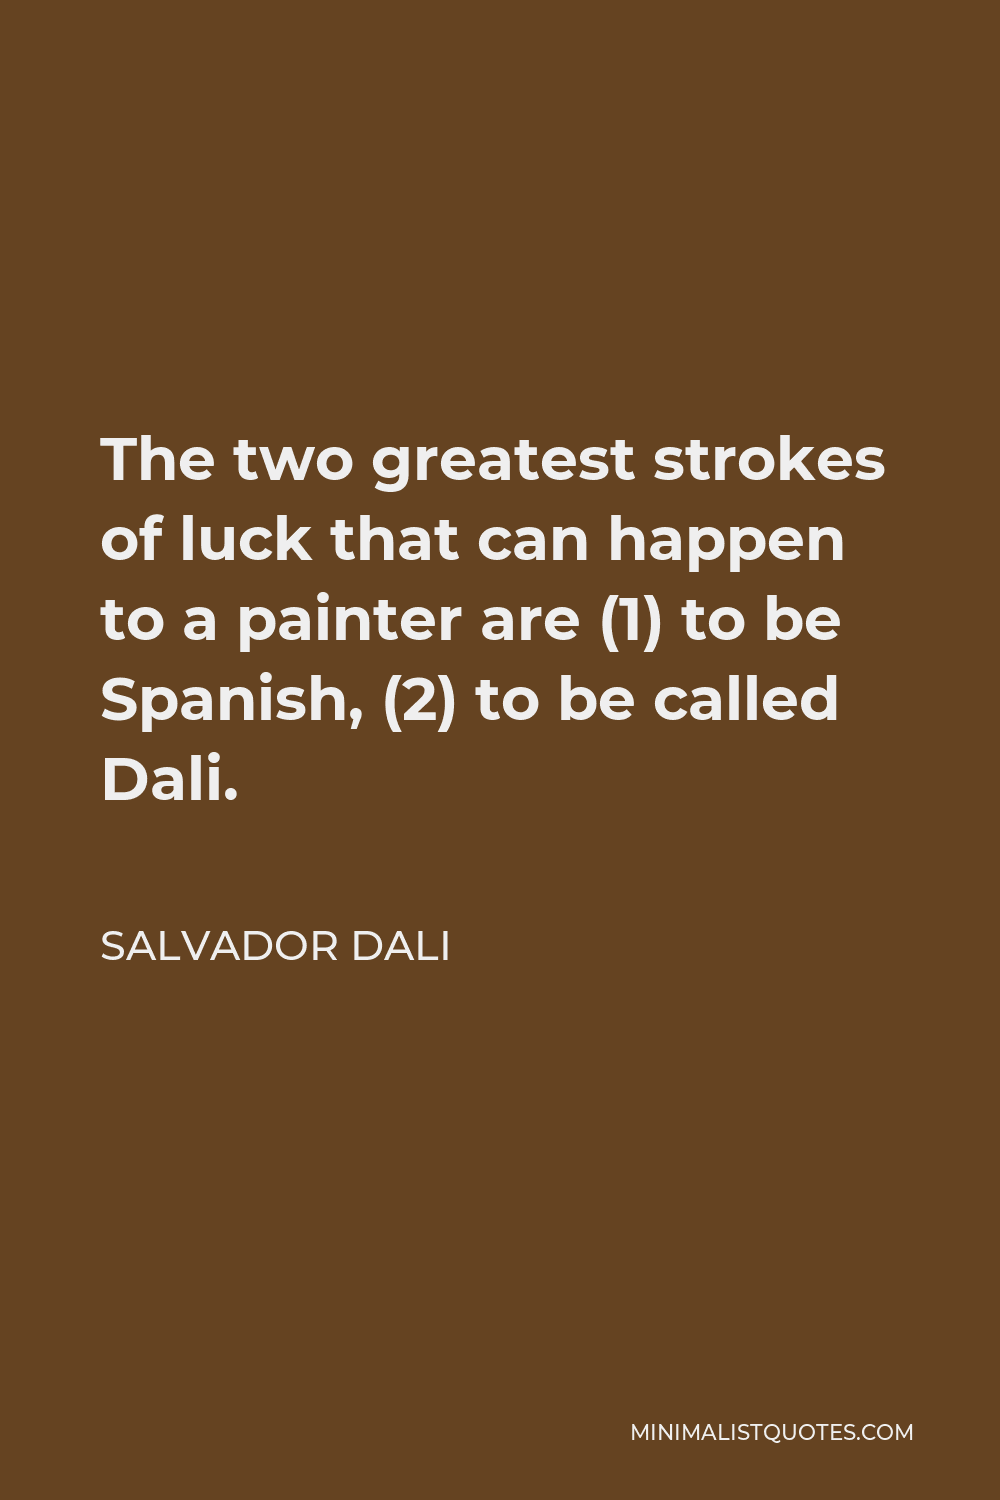 Salvador Dali Quote - The two greatest strokes of luck that can happen to a painter are (1) to be Spanish, (2) to be called Dali.